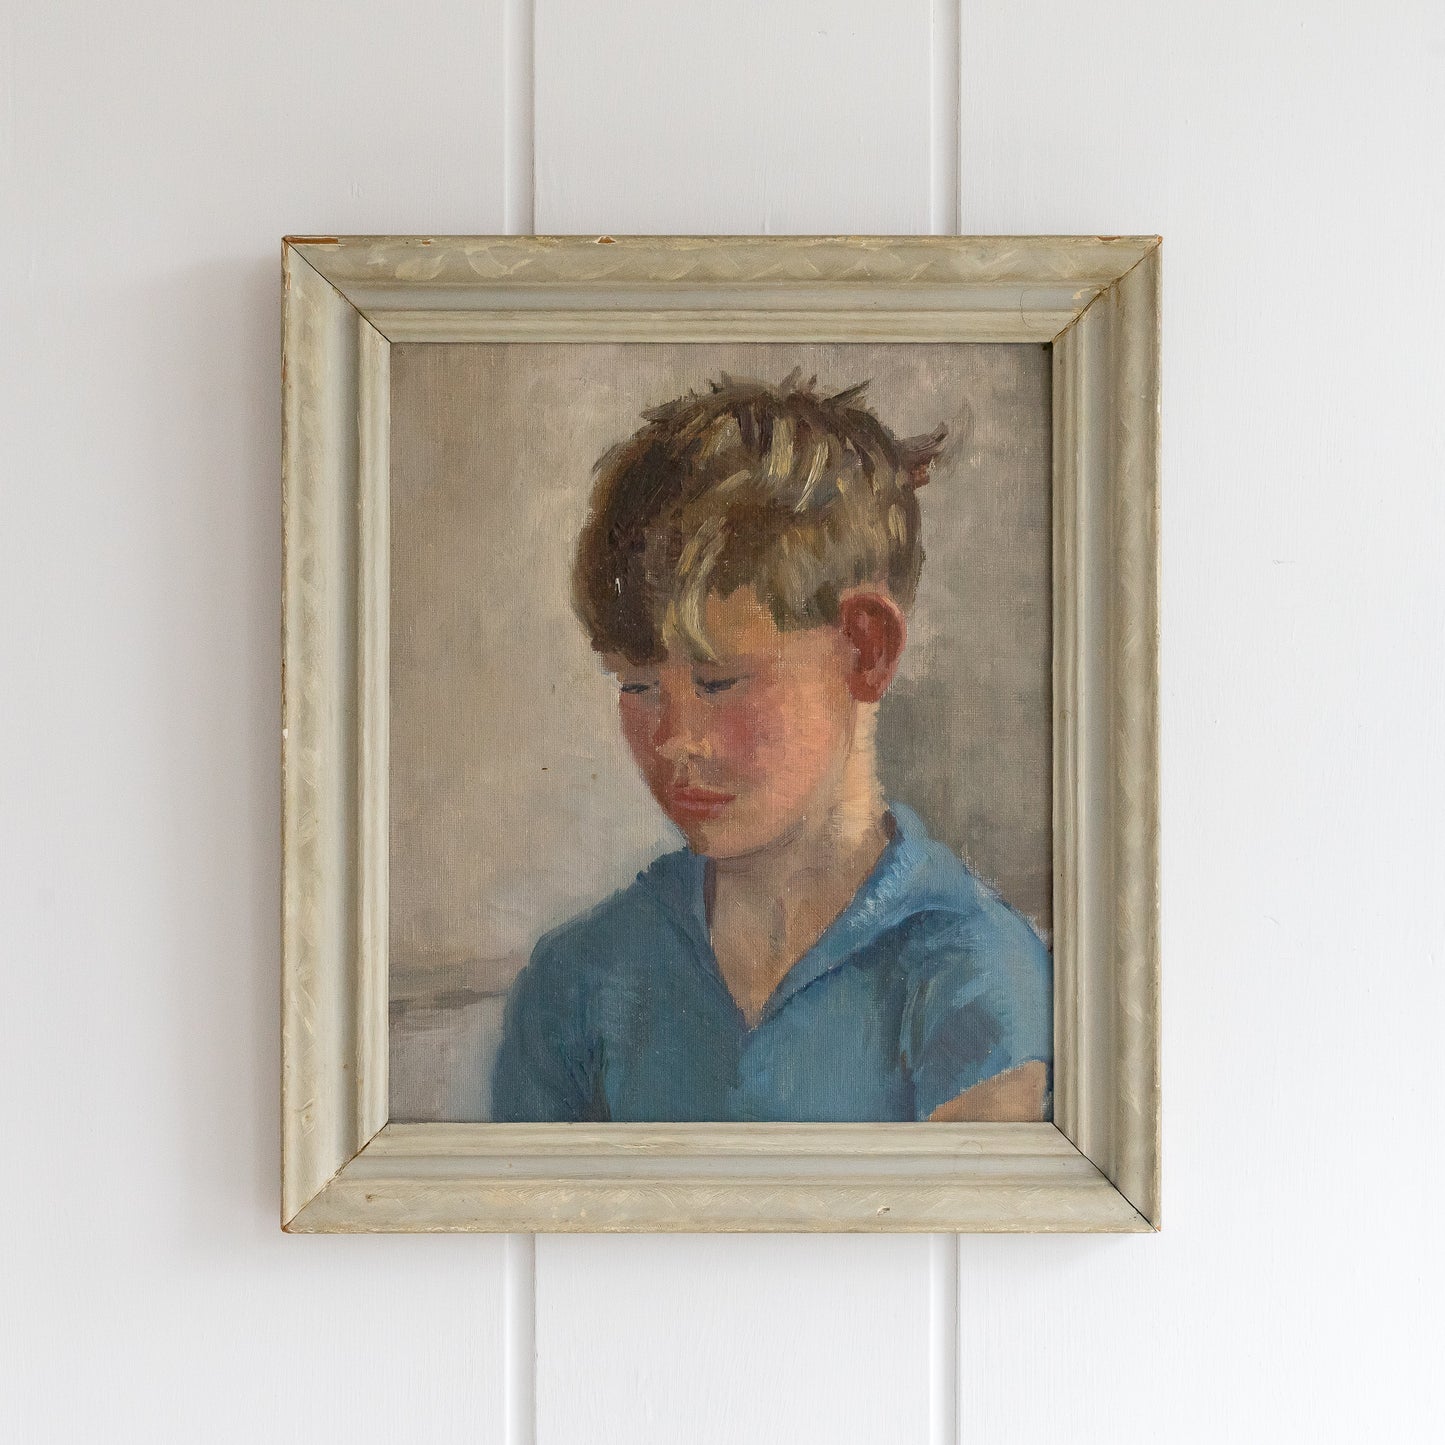 OIL PAINTING OF A YOUNG BOY